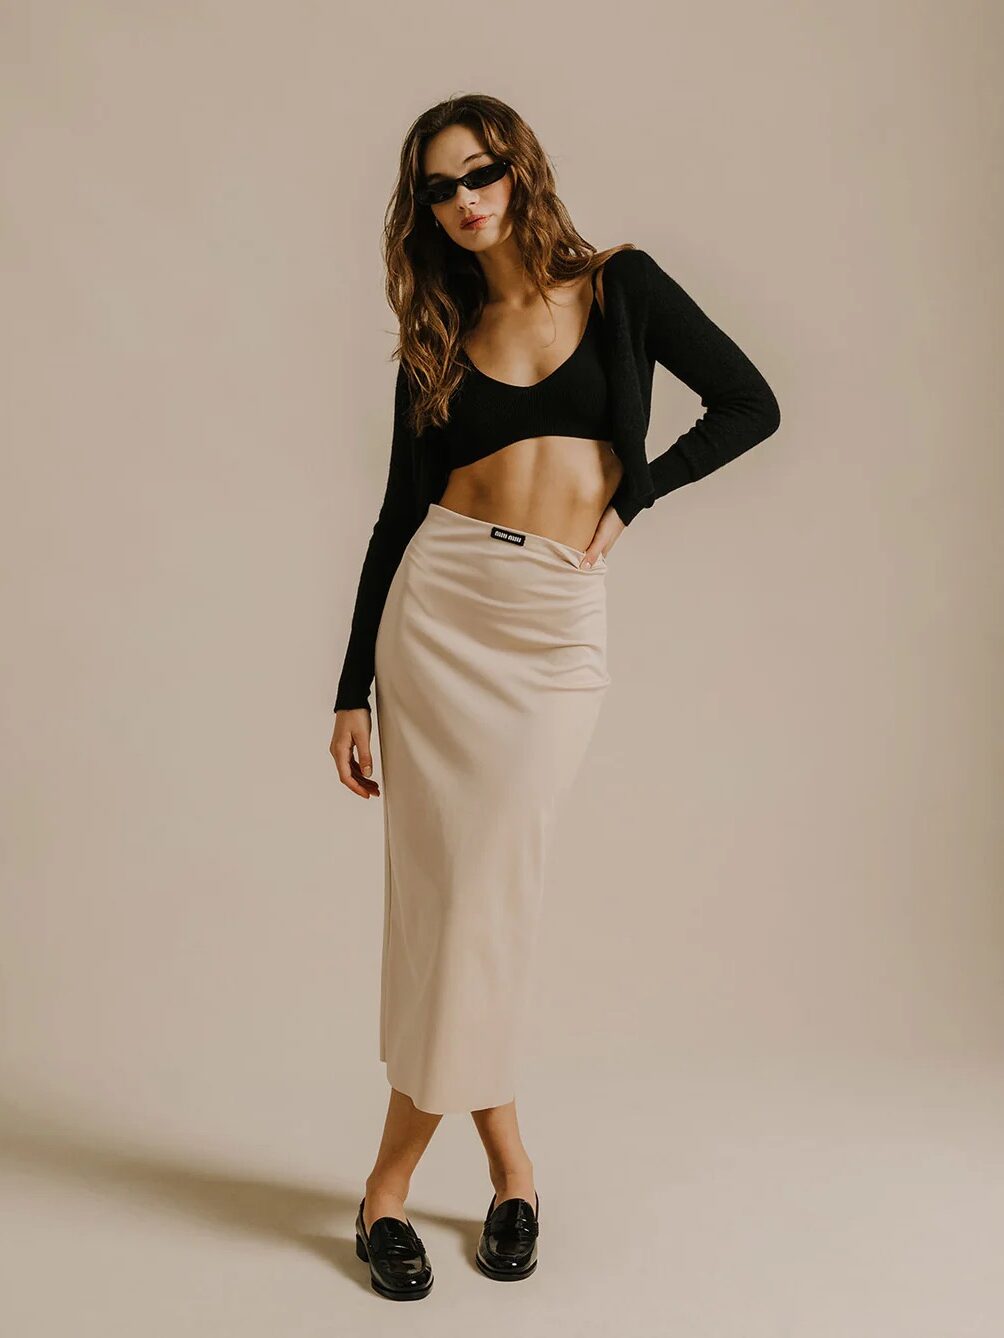 Woman in stylish attire posing confidently, wearing a black crop top, beige skirt, sunglasses, and black loafers against a neutral backdrop.